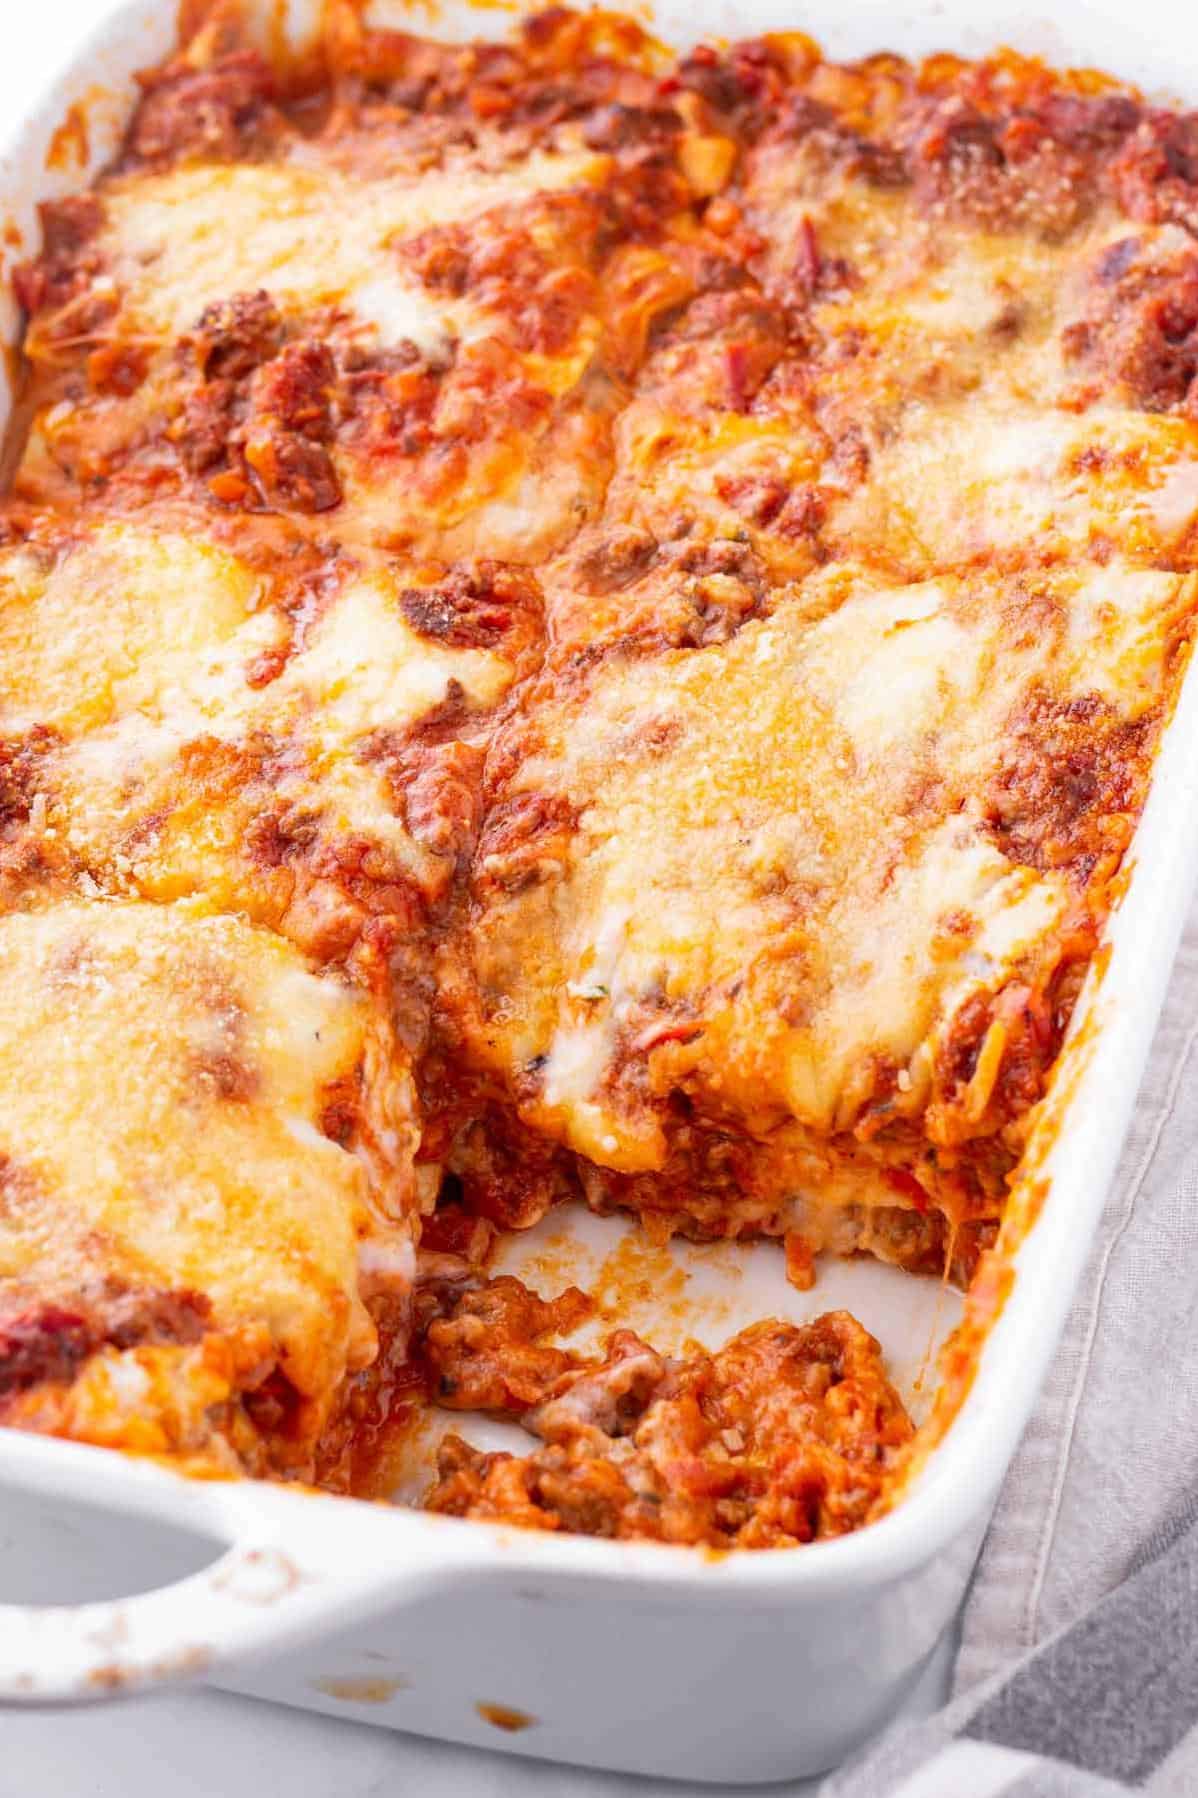  This lasagna is so easy, it practically makes itself!